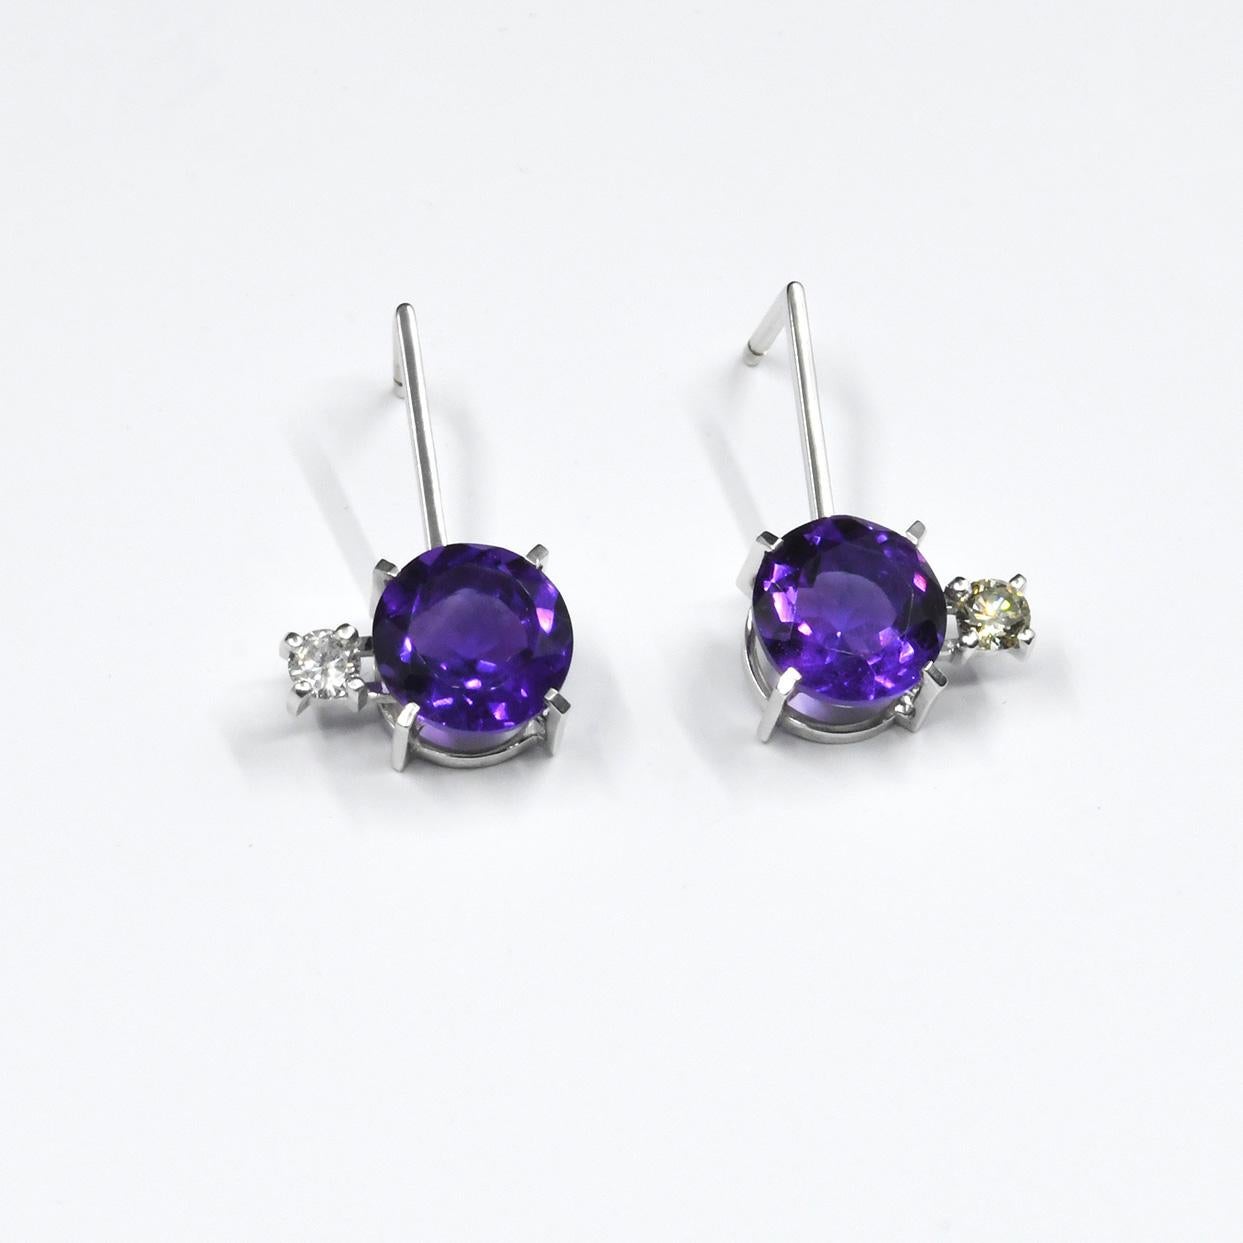 Contemporary Singularity Earings with 2.5 ct Amethysts, 0.1 ct Diamonds on 18k White Gold For Sale